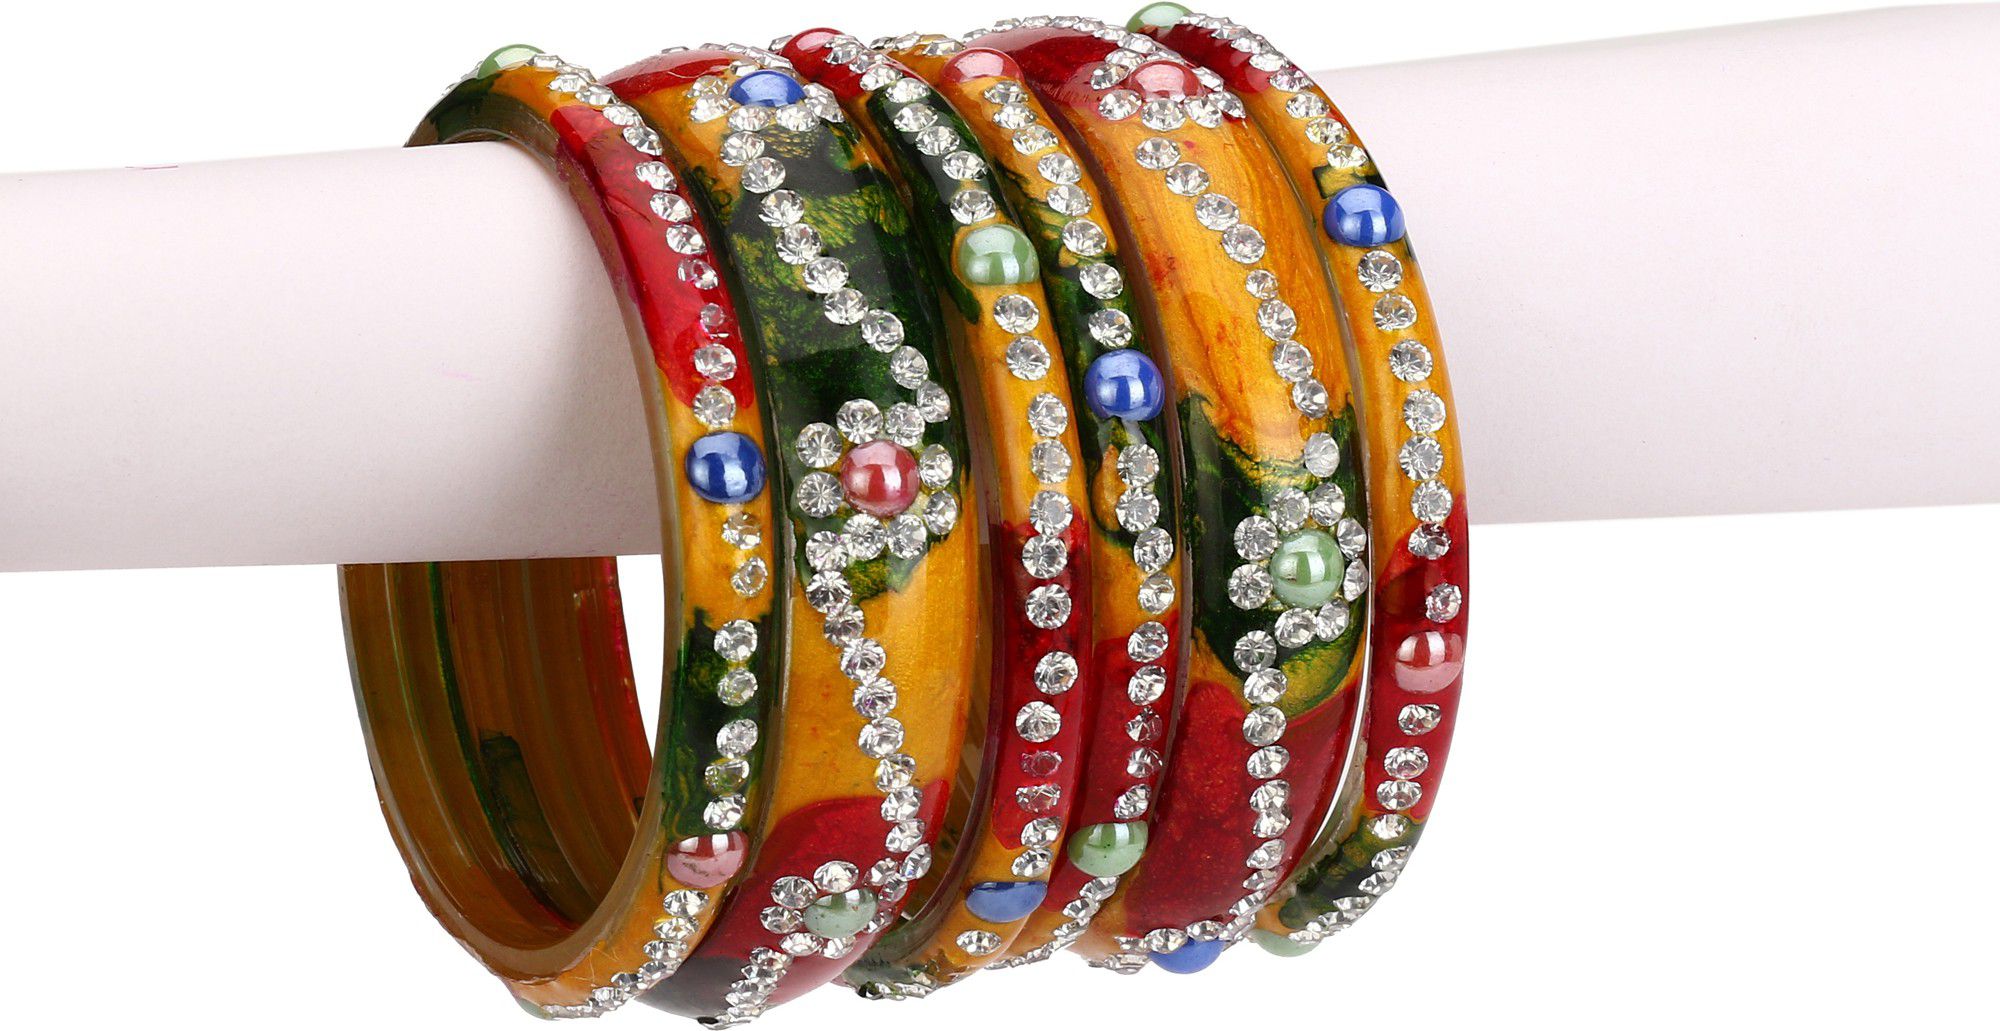     			Somil Multi Color 2 & 4 Bangle Set decorative With Colorful Beads & Stones With Safety Box-DM_2.4